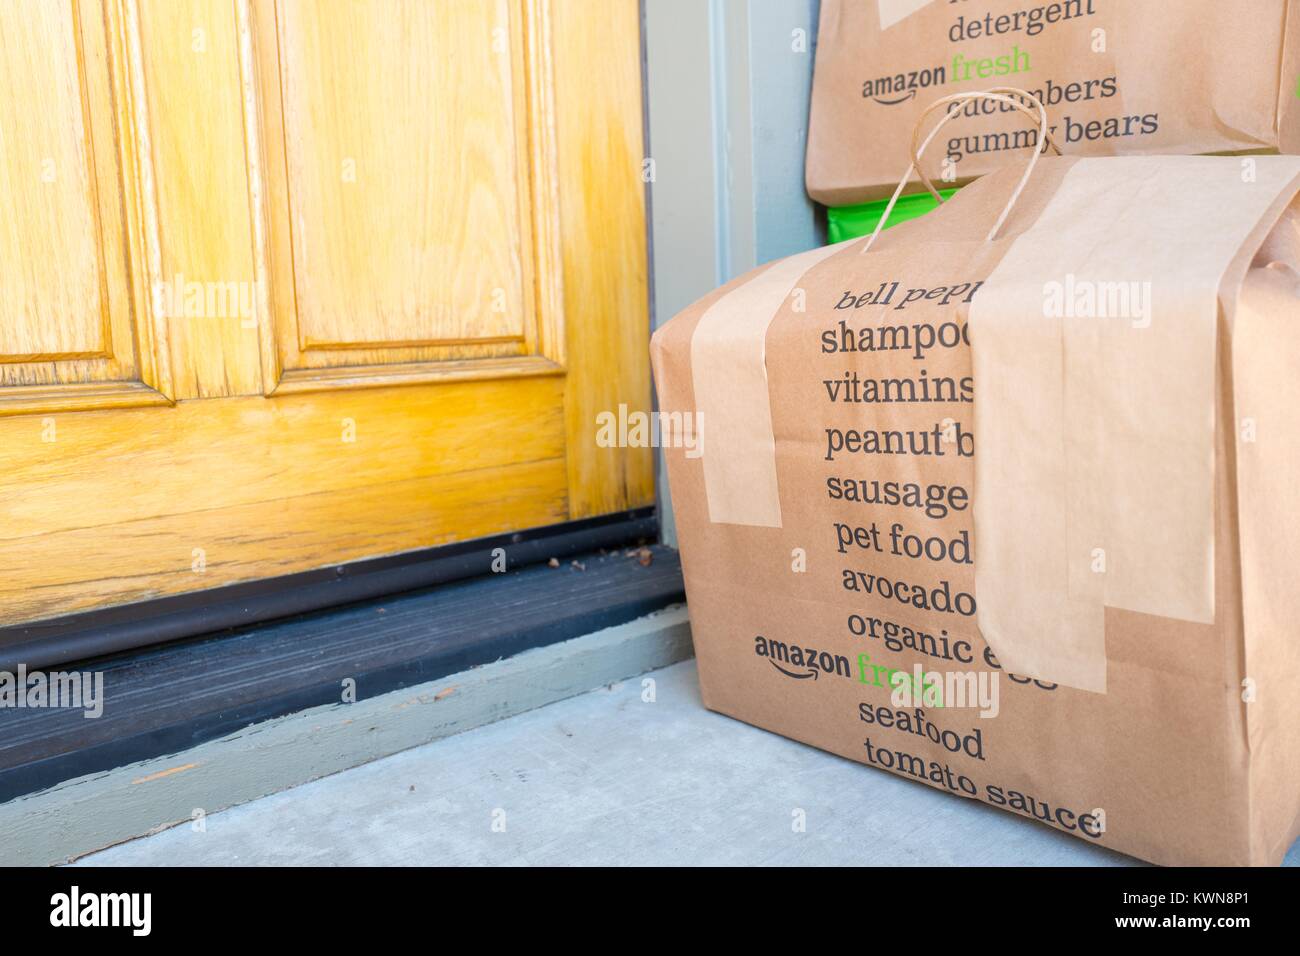 Brown paper tote for Amazon Fresh grocery delivery service, with Amazon logo and text listing groceries which may be ordered using the service, on the doorstep of a suburban home in the San Francisco Bay Area town of San Ramon, California, July 26, 2017. In June of 2017, Amazon announced that it would acquire the upscale grocery chain Whole Foods Market to expand its offerings in the grocery industry. Stock Photo